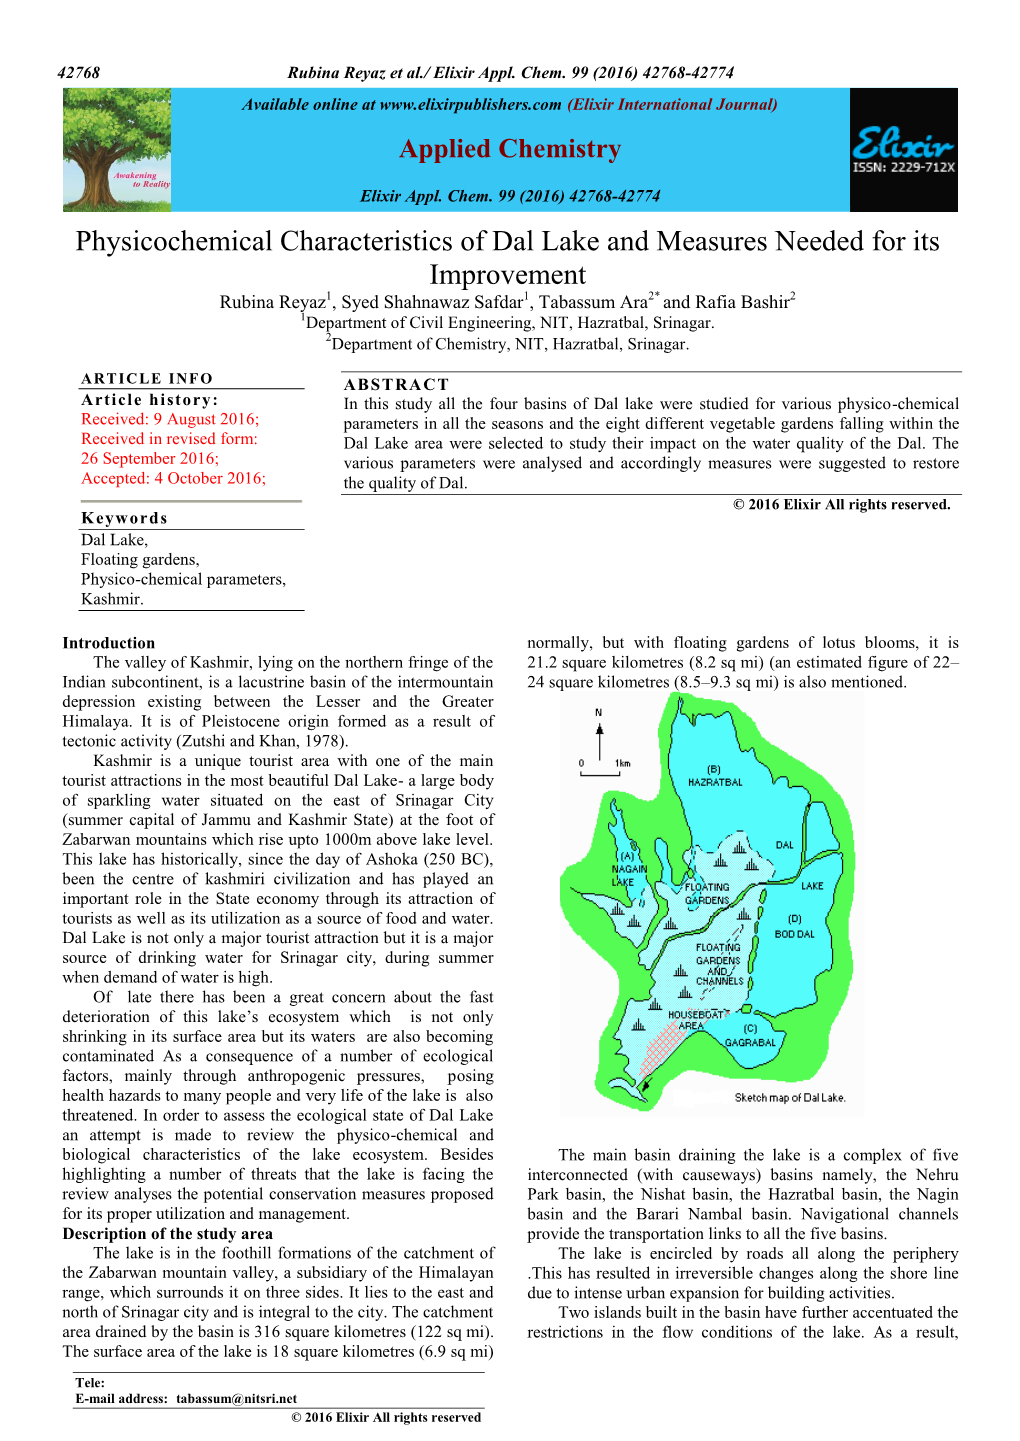 Physicochemical Characteristics of Dal Lake and Measures Needed For